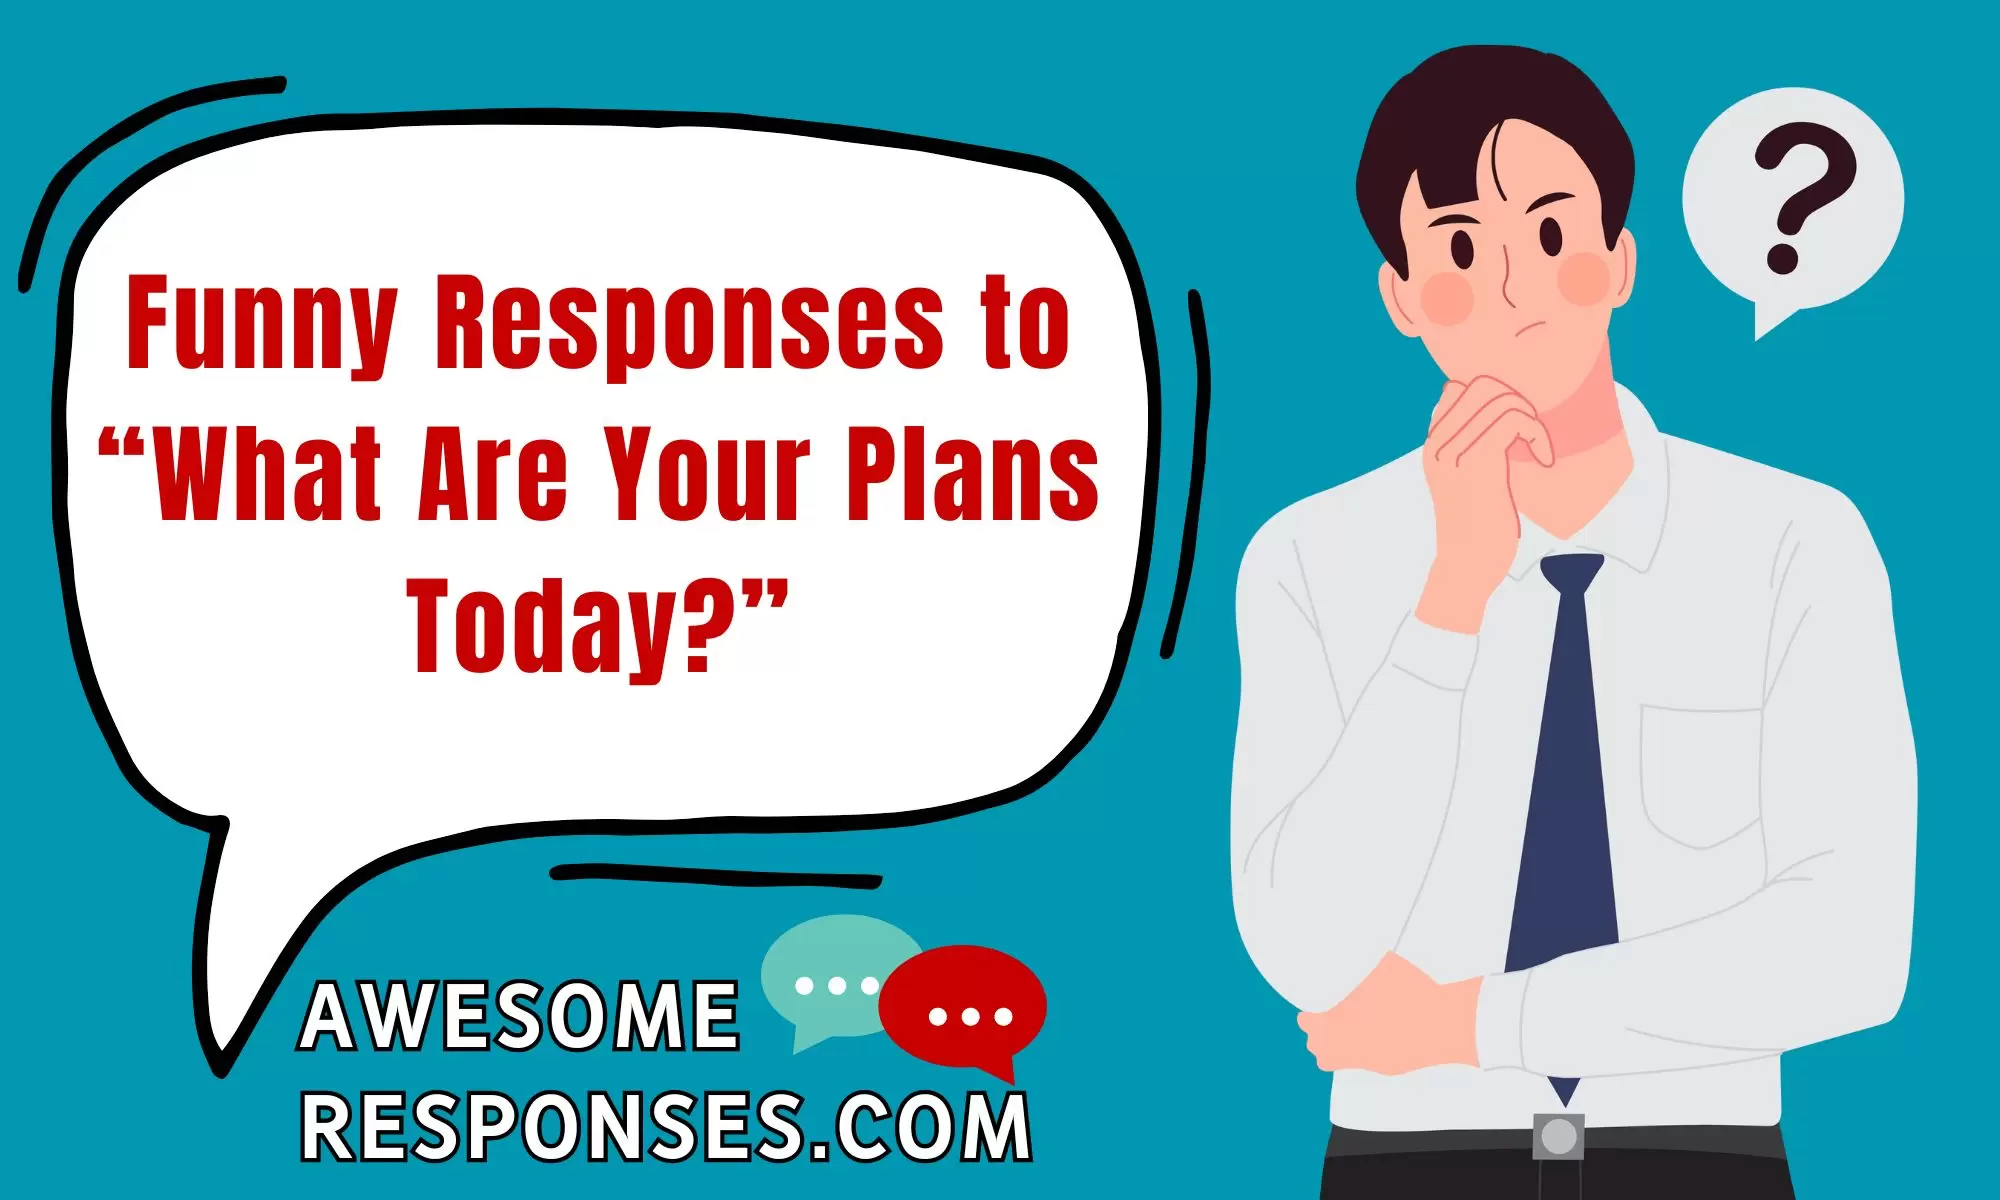 Funny Responses to “What Are Your Plans Today?” : Embracing the Humor